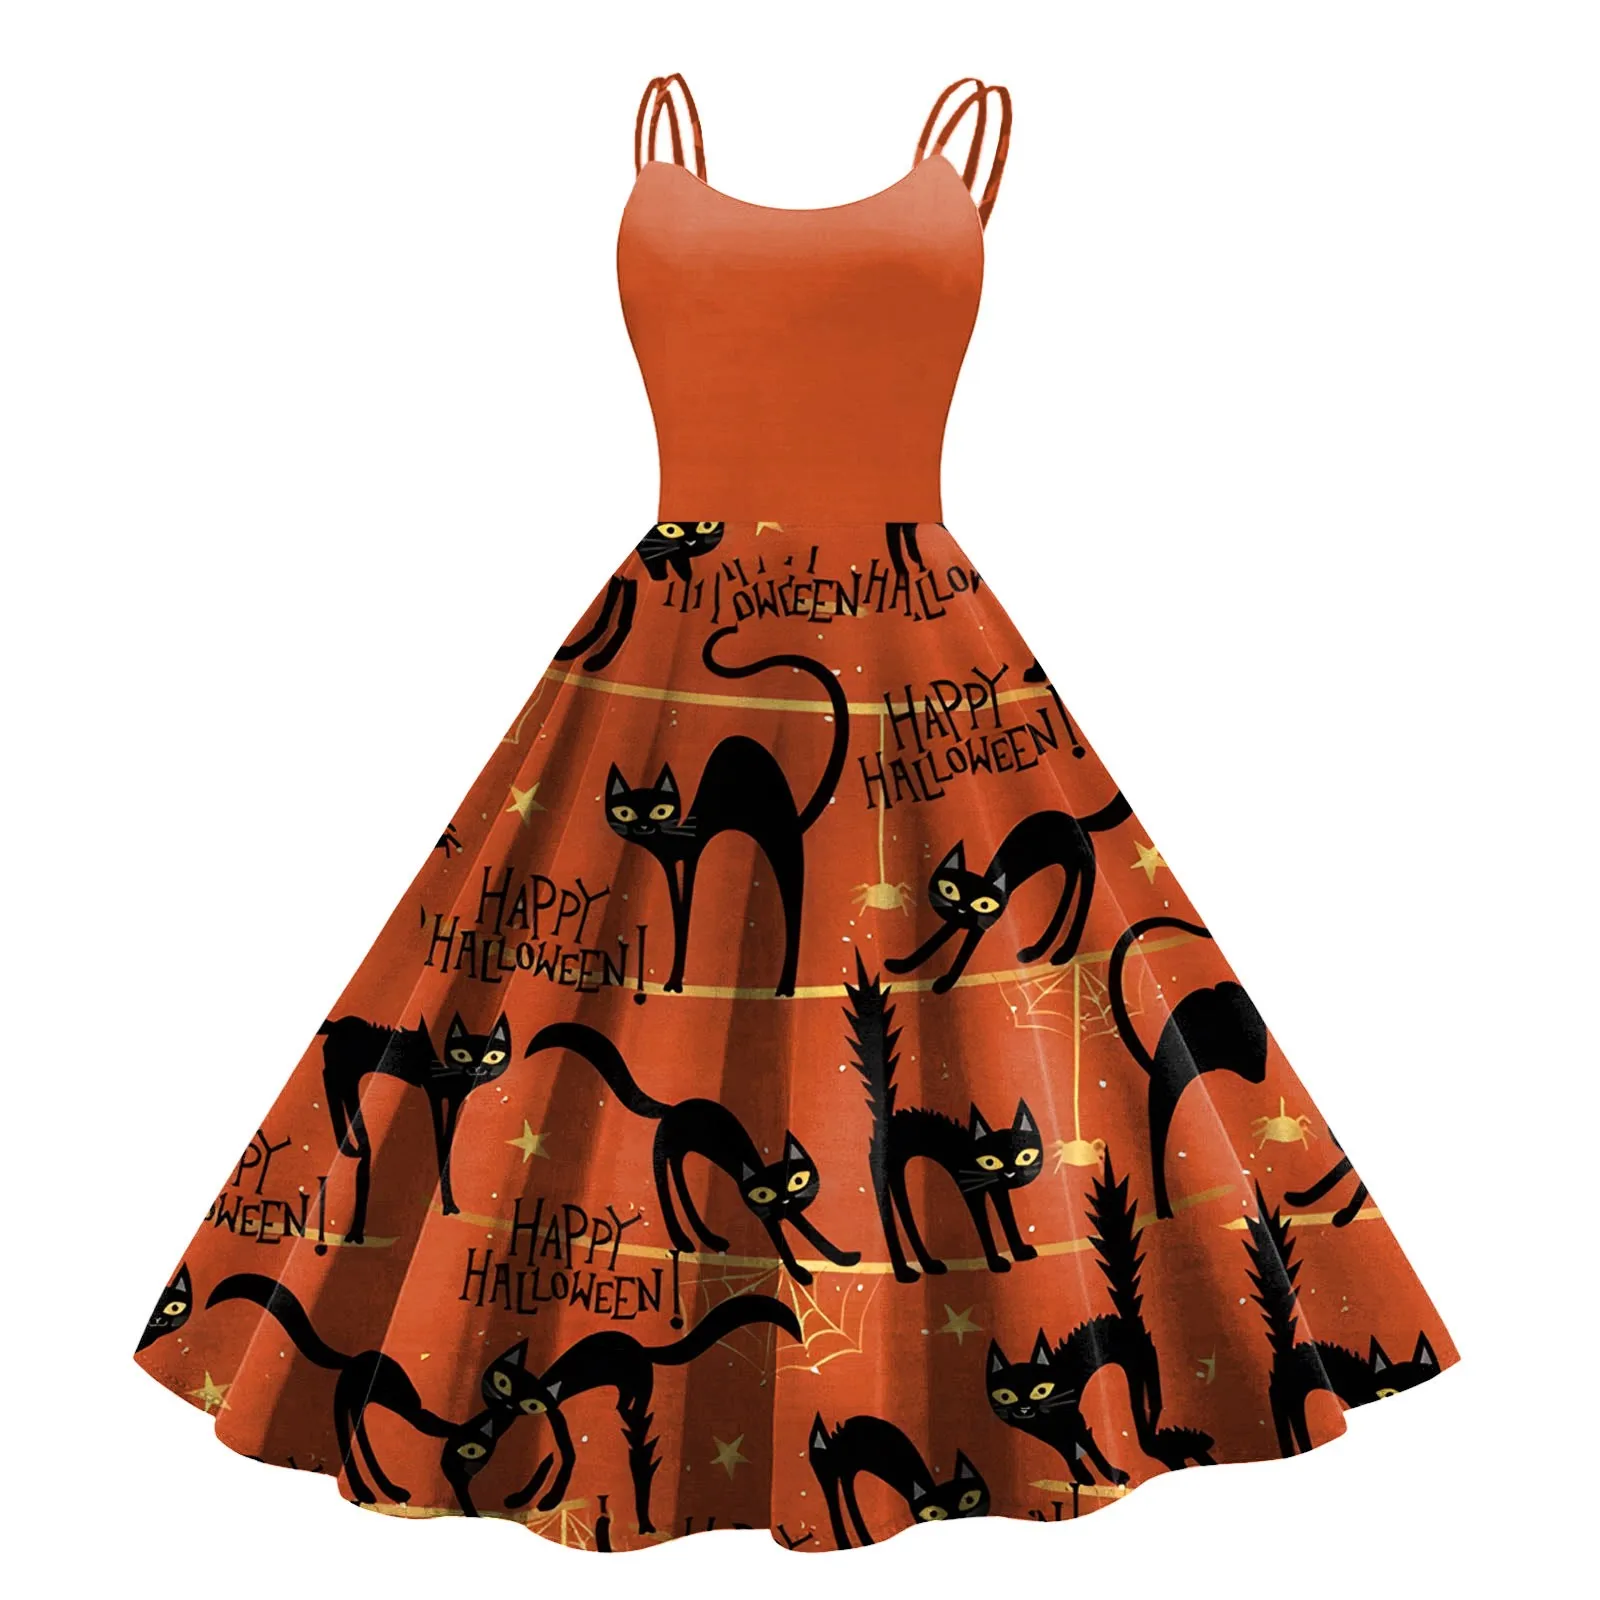 

Halloween Animal Print Vintage Dress 50s 60s Gothic Pin Up Rockabilly Dress Robe Femme Sexy Spaghetti Strap Party Summer Dresses